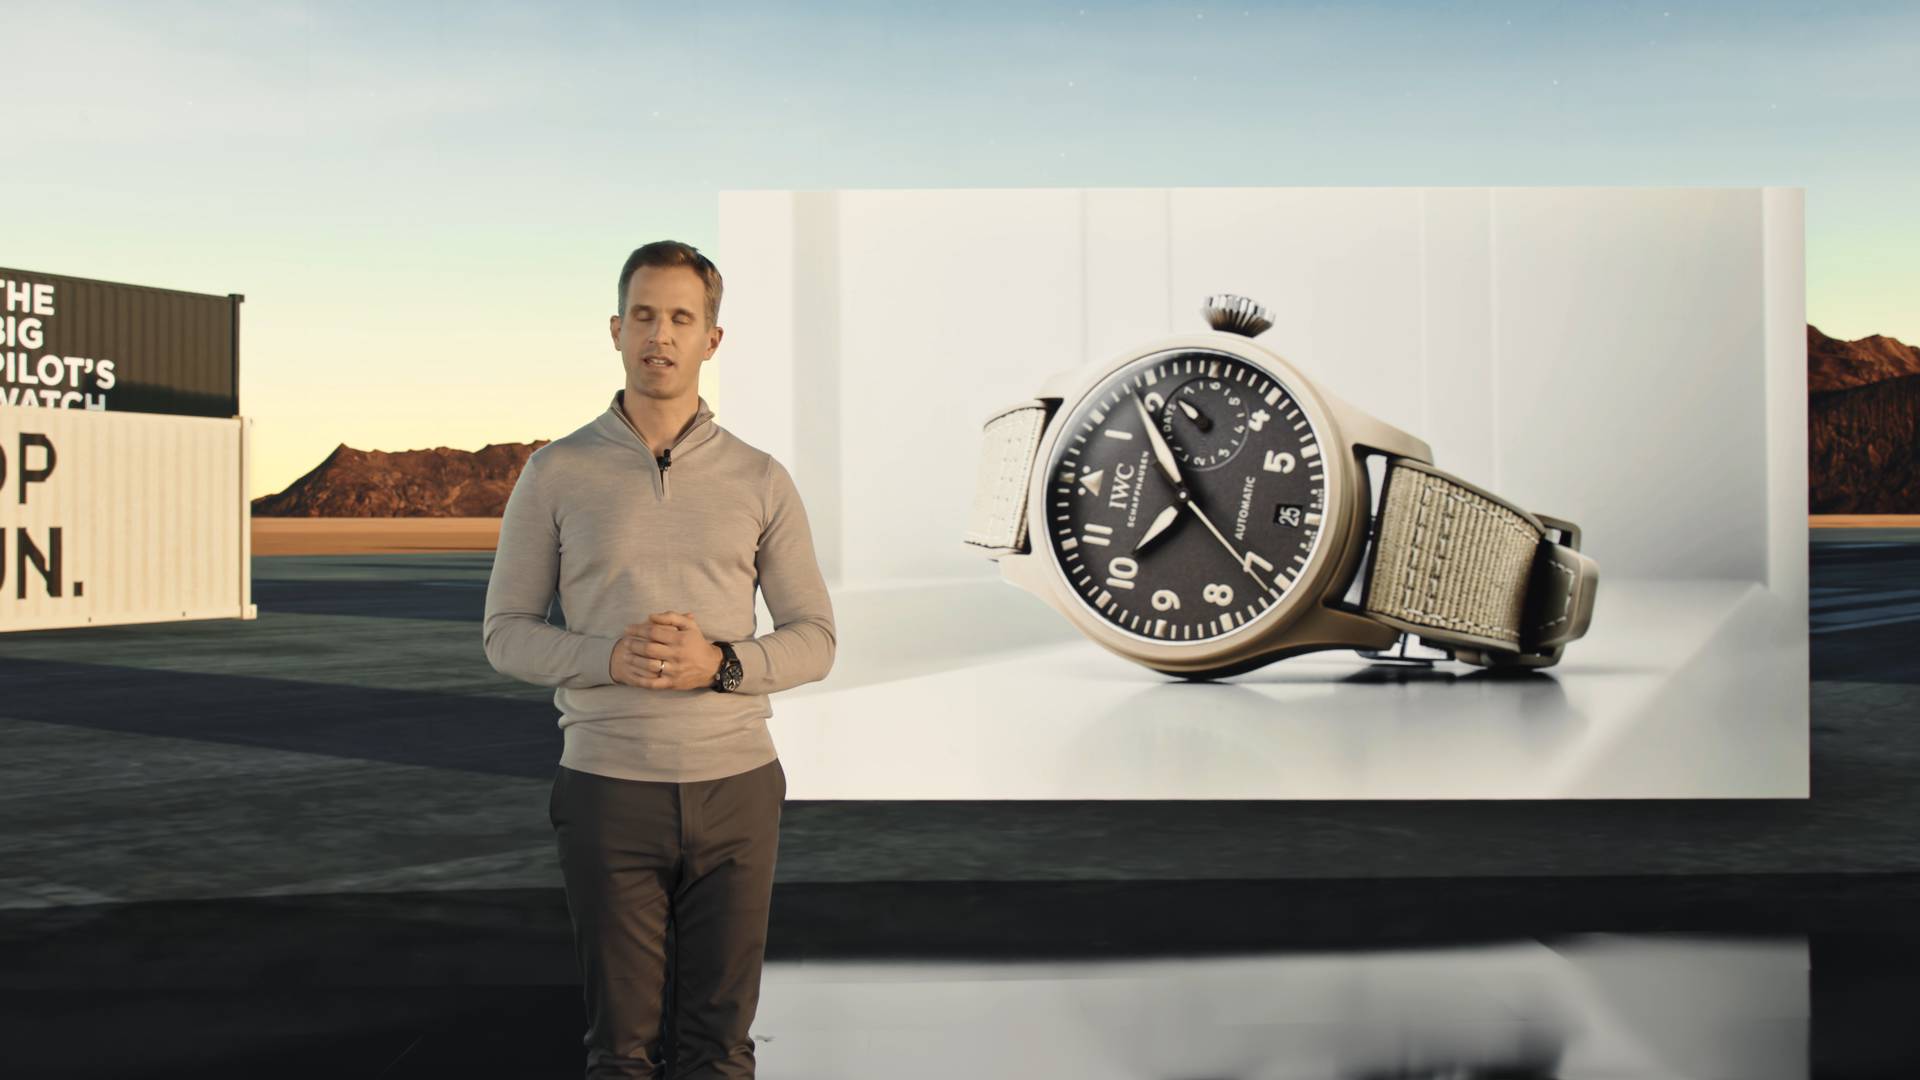 Christopher Grainer Herr standing in front of a billboard with a watch.